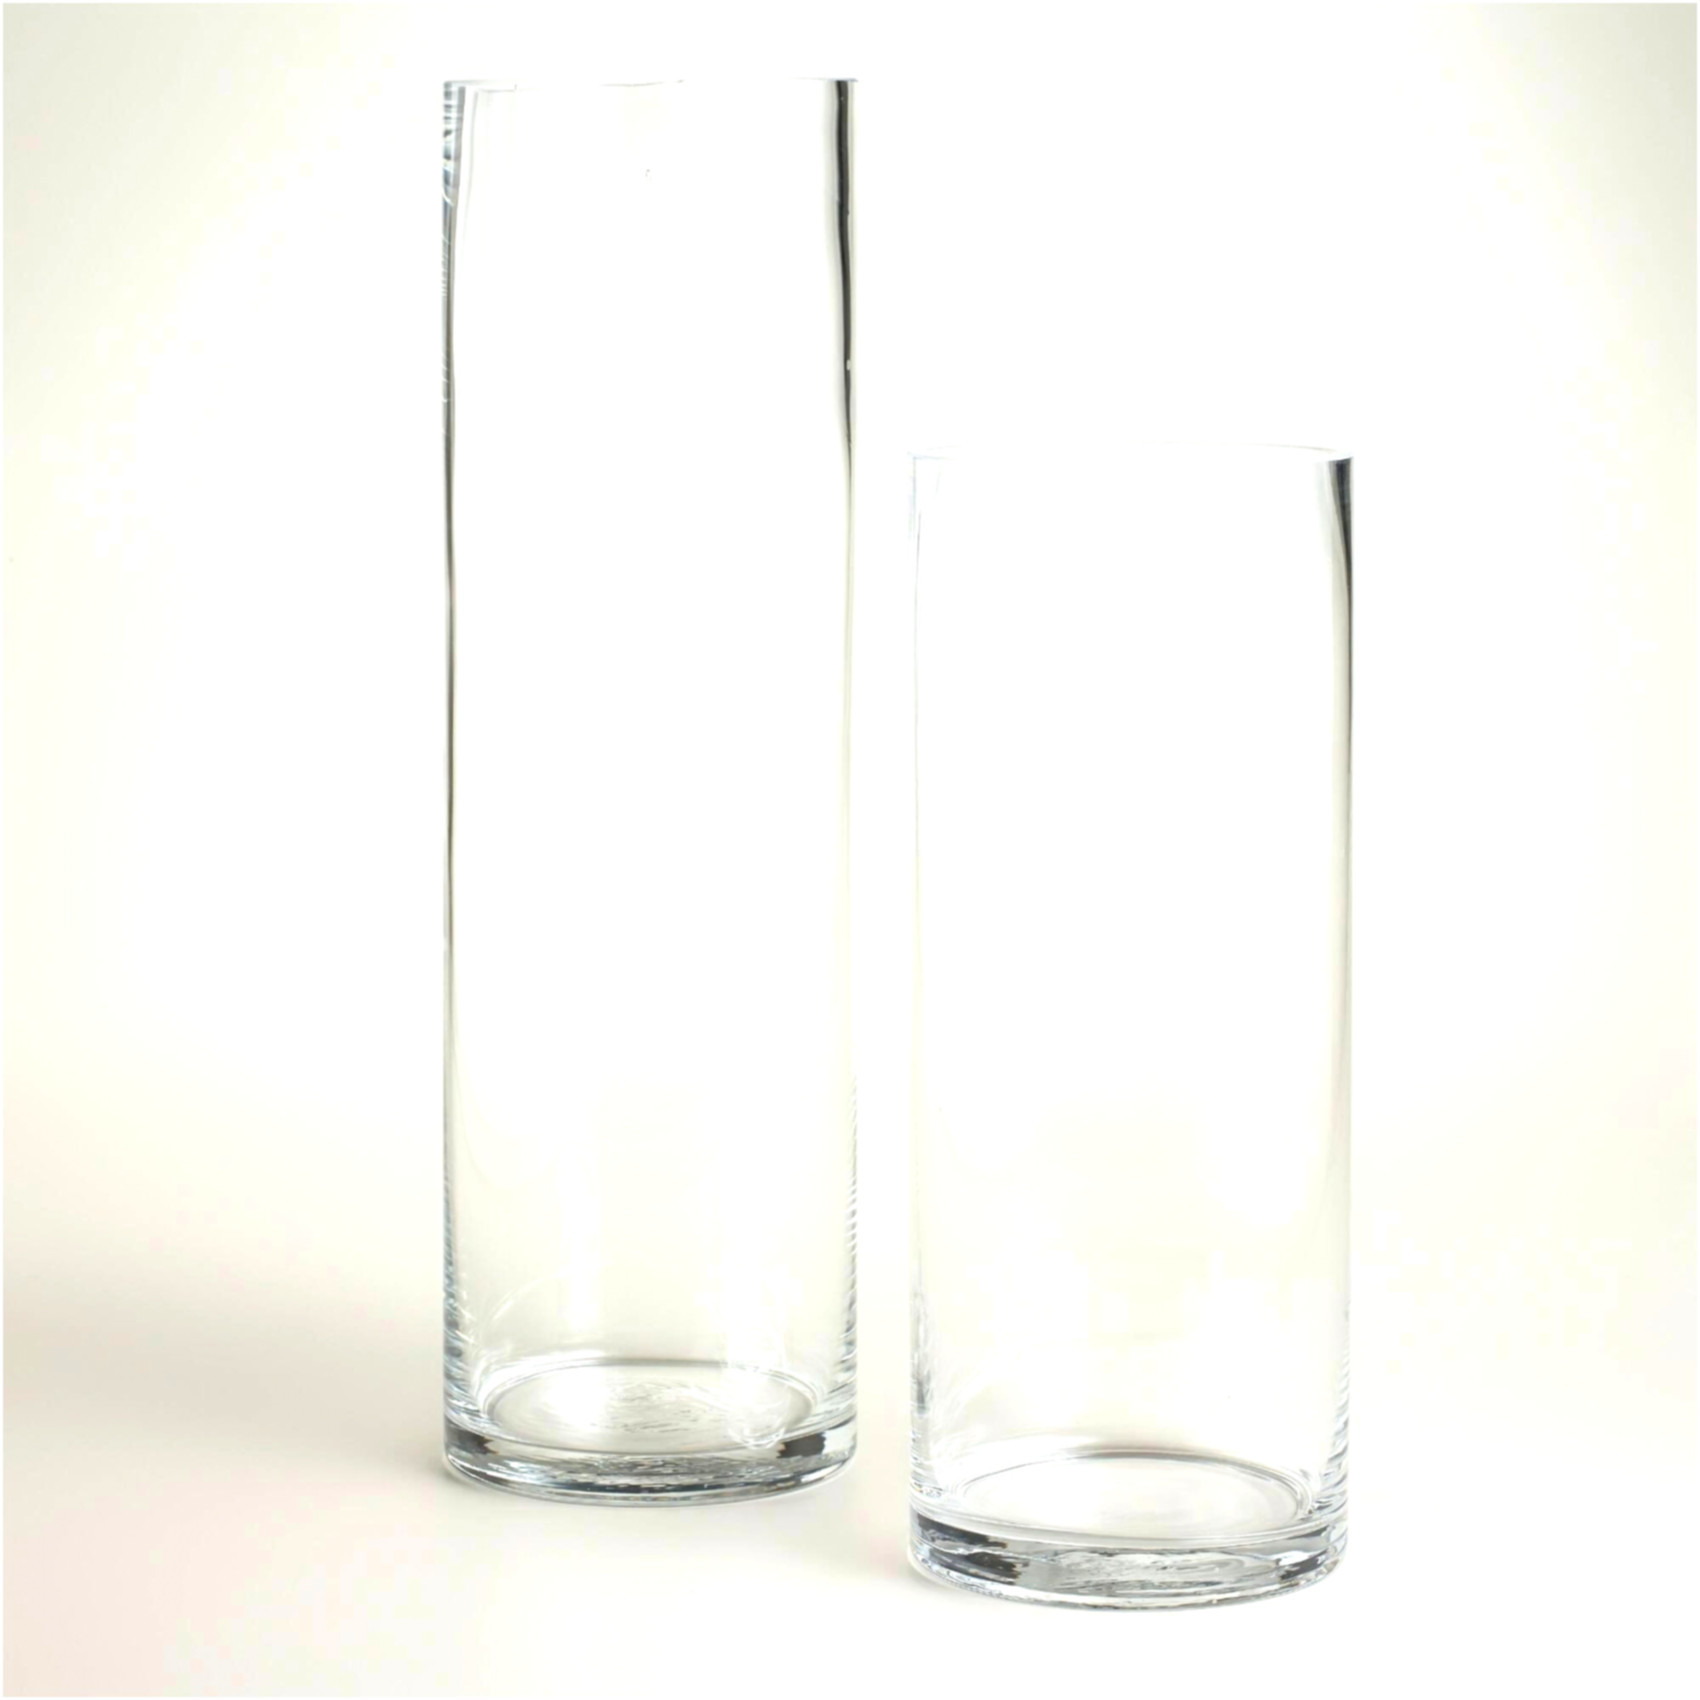 29 Recommended 5 Inch Glass Vase 2024 free download 5 inch glass vase of why you should not go to glass vases wholesale glass vases regarding crystal glass vases wholesale inspirational 30 elegant vases with